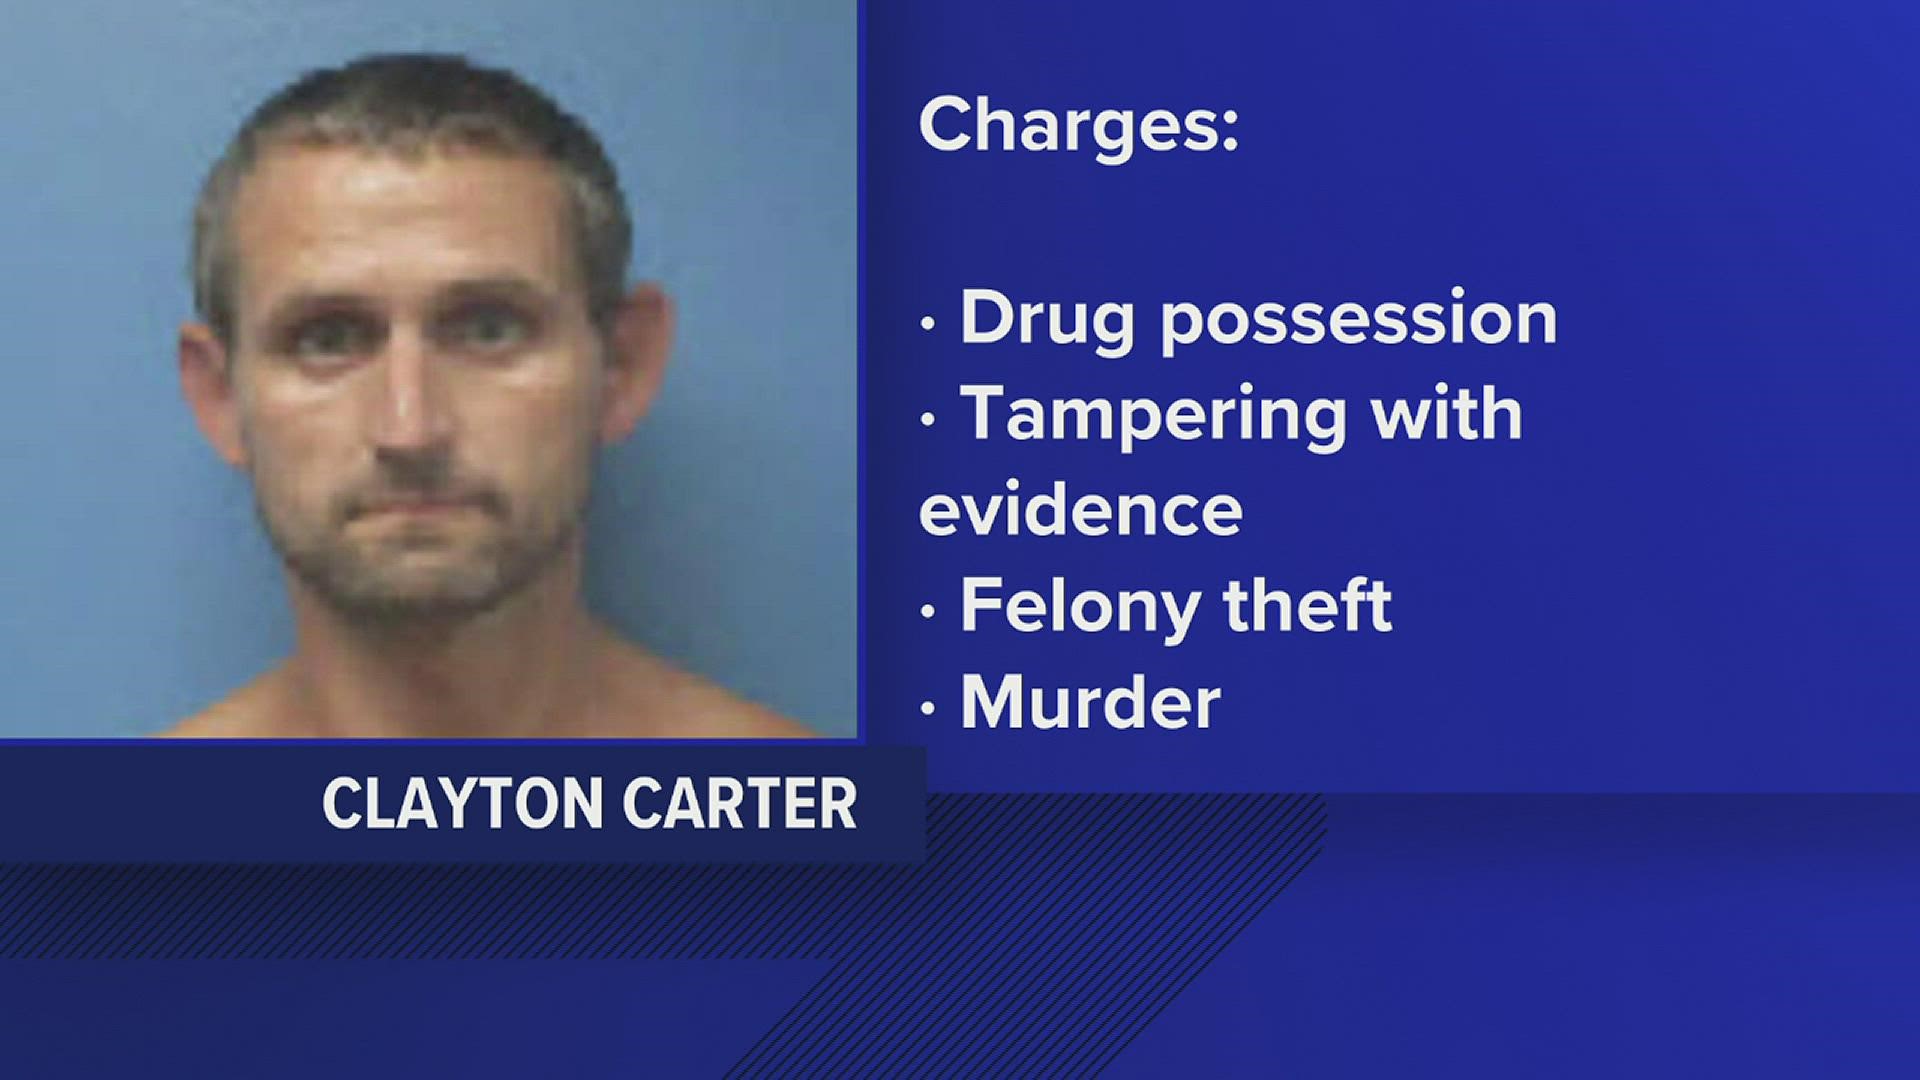 Clayton Carter is facing several charges including murder, tampering with evidence, fraud, theft and other charges that are unrelated Willman's case.